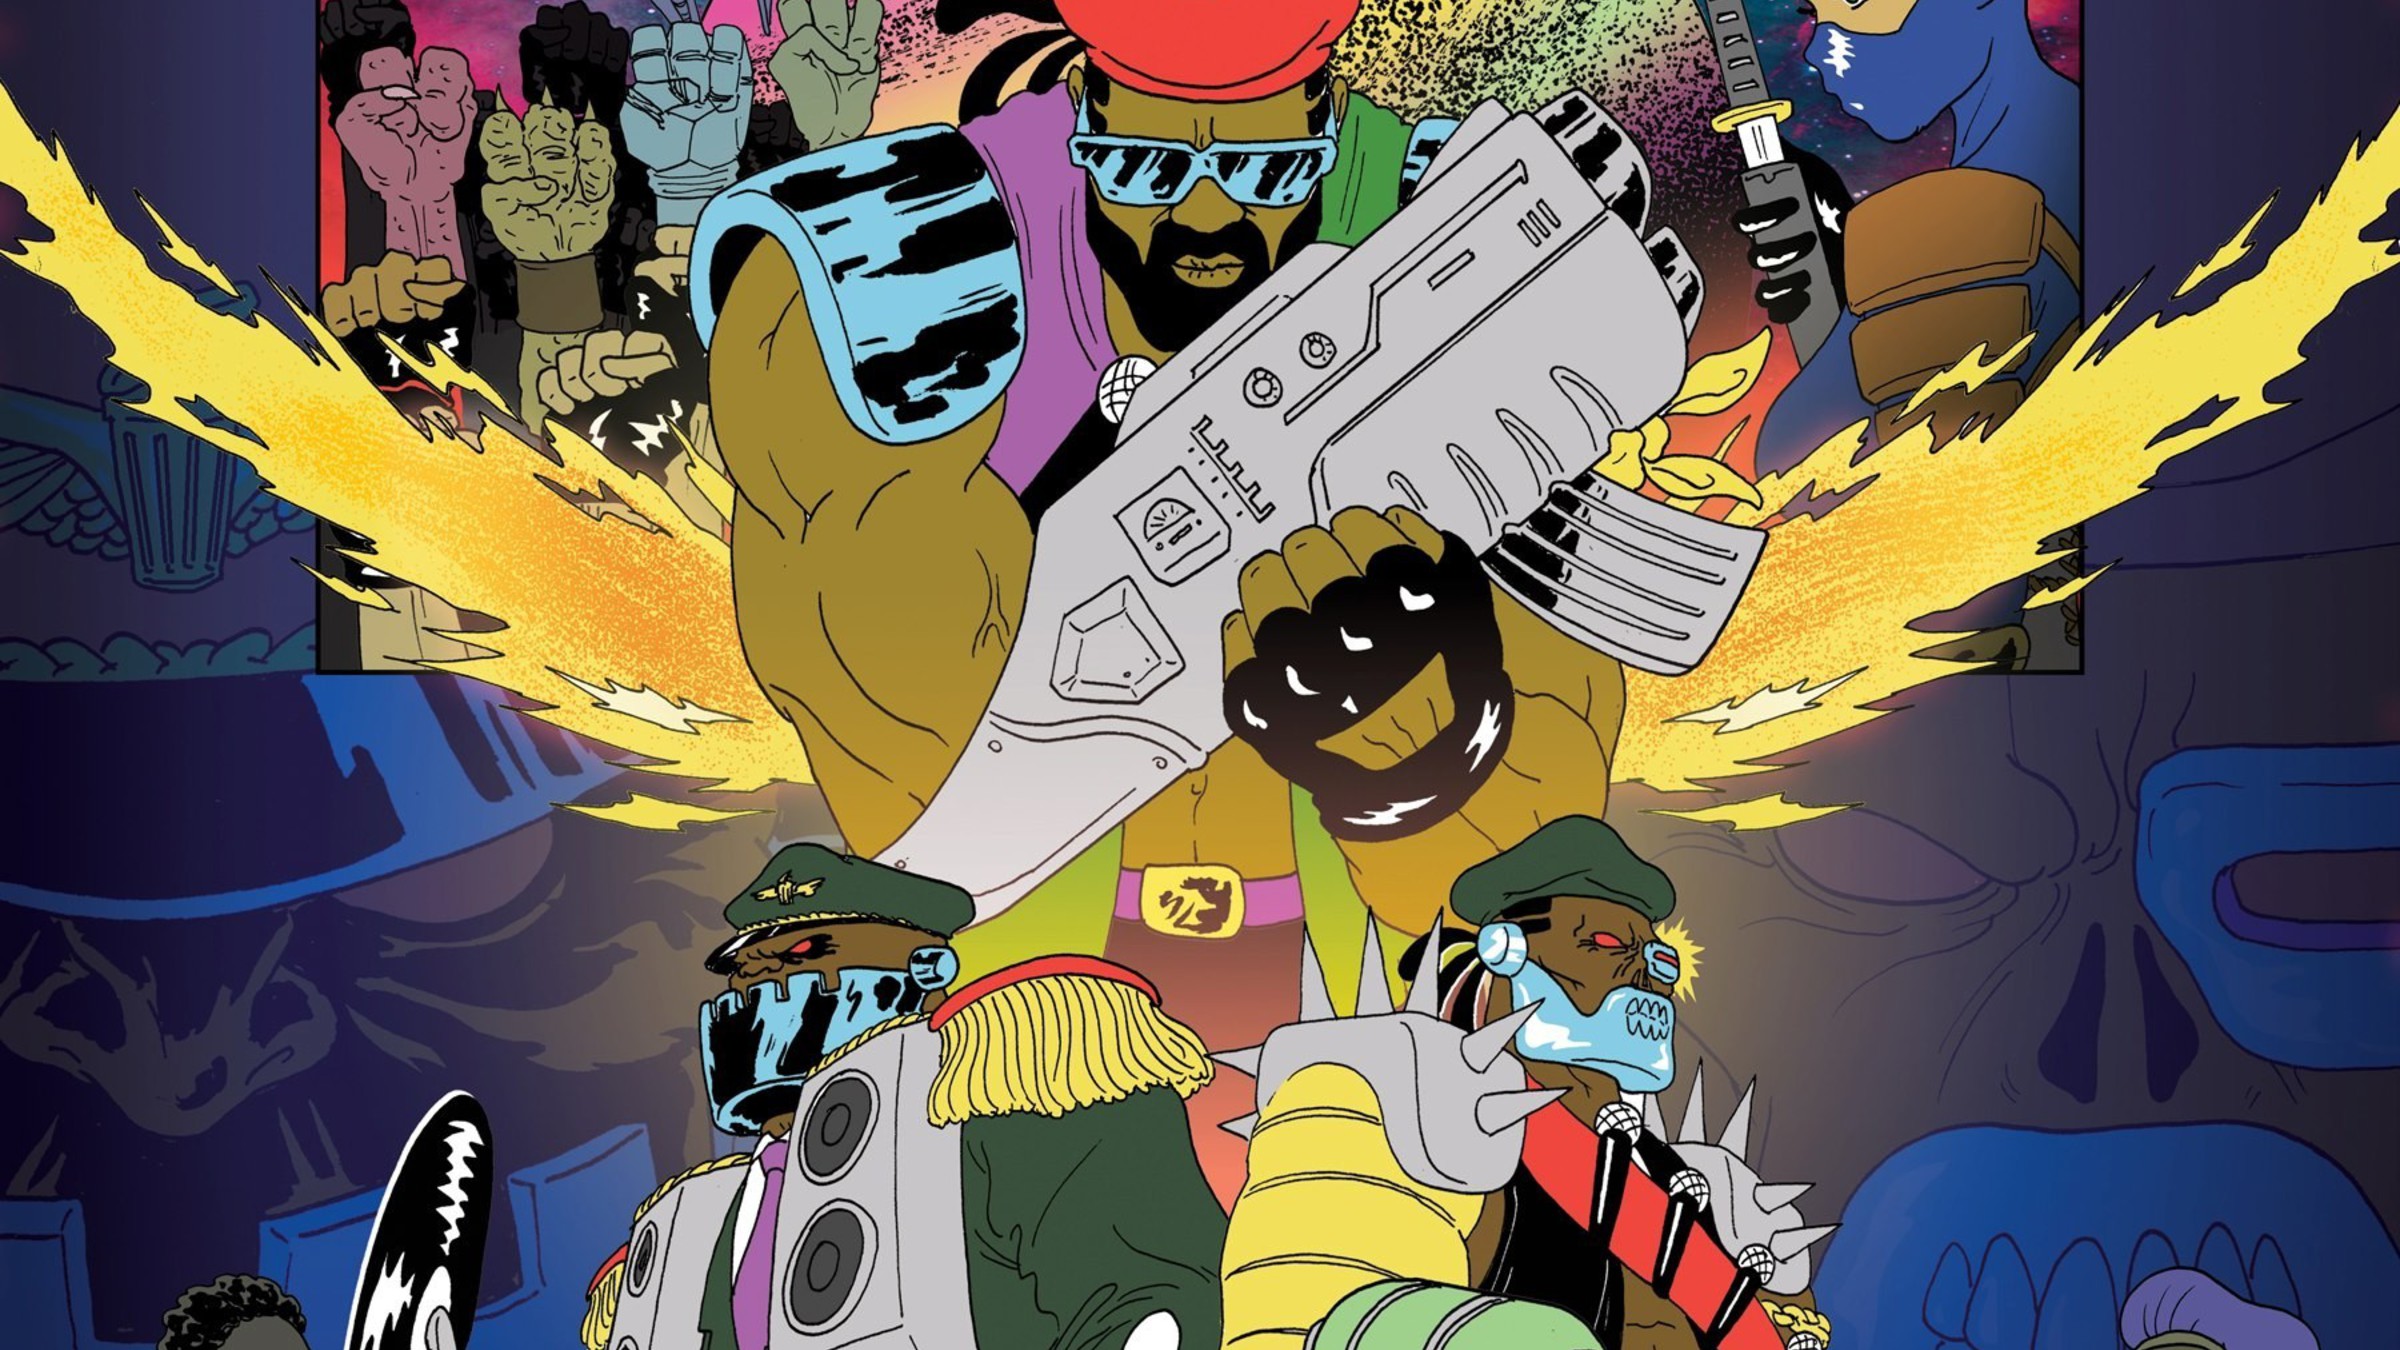 Wallpaper Resolutions - Major Lazer Free The Universe Album Cover , HD Wallpaper & Backgrounds